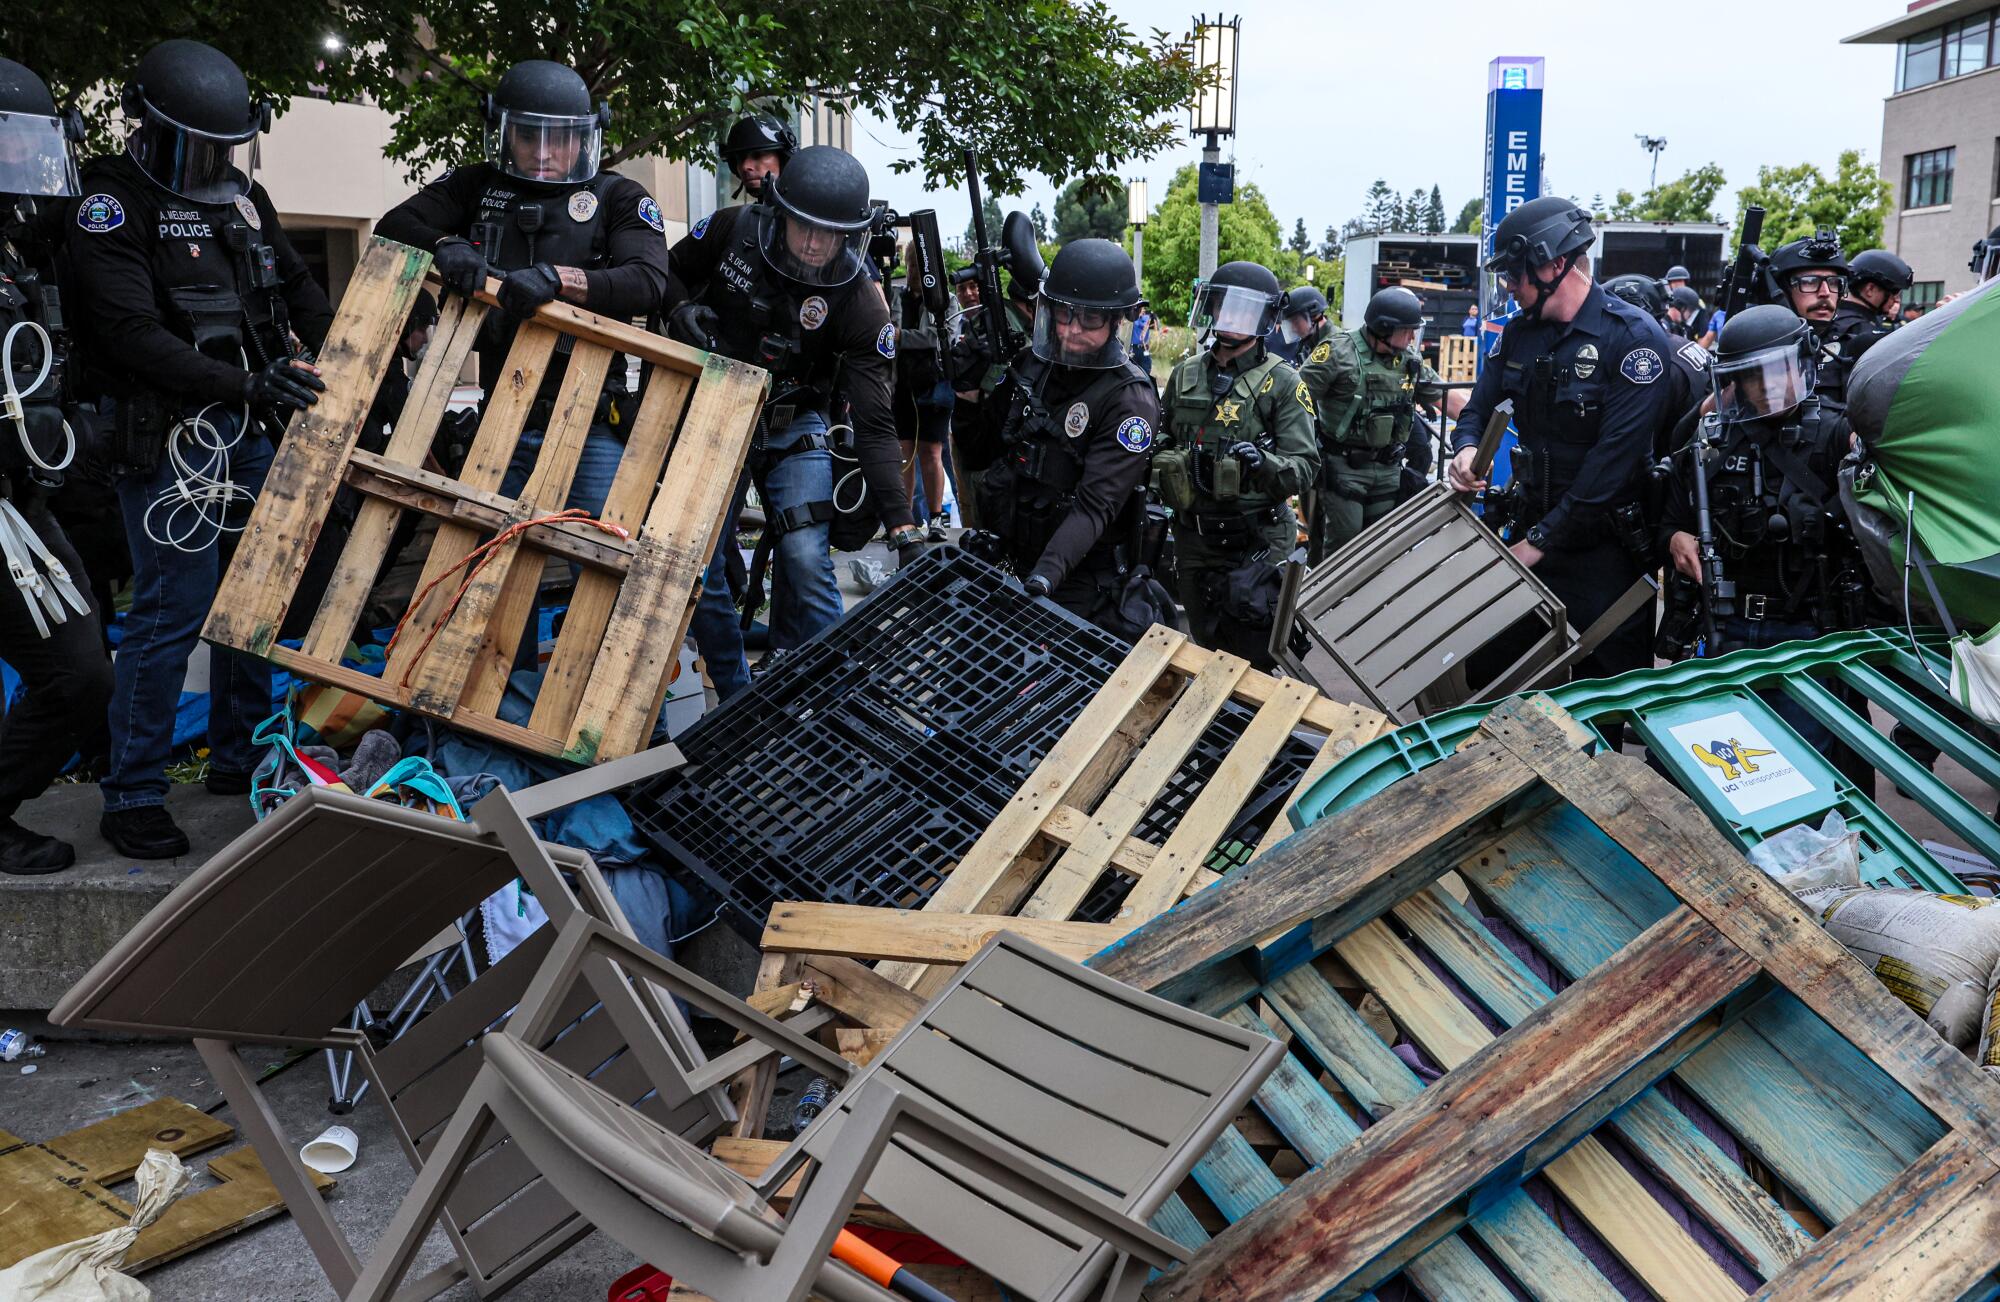 Police remove pallets and furniture set up as a barricade.